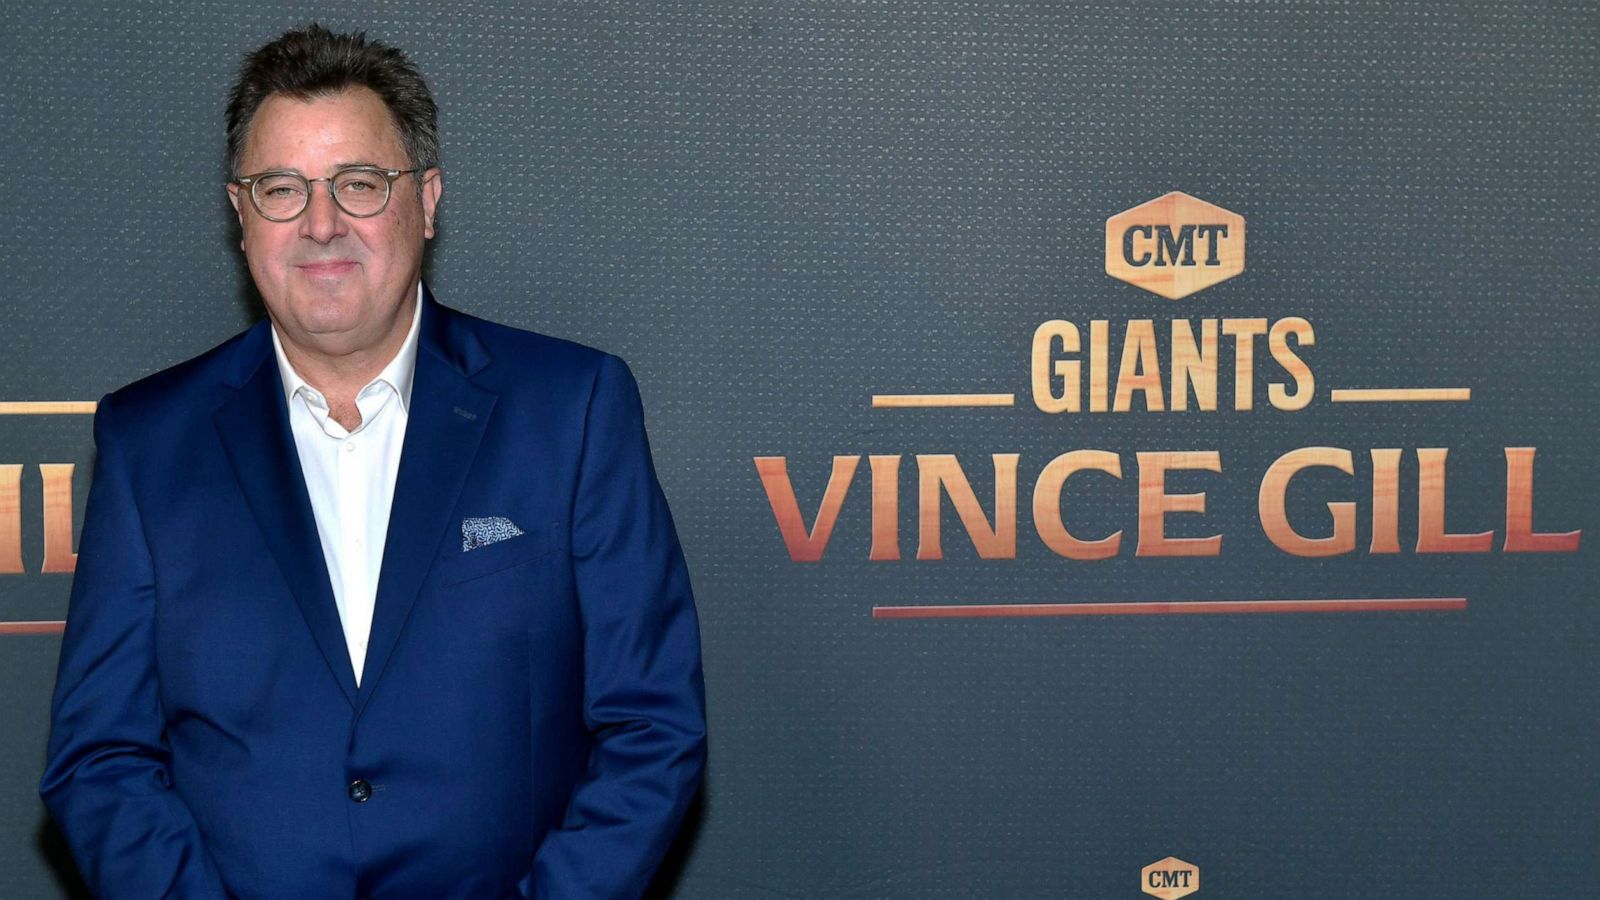 Luke Combs, Carrie Underwood and more stars detail Vince Gill's